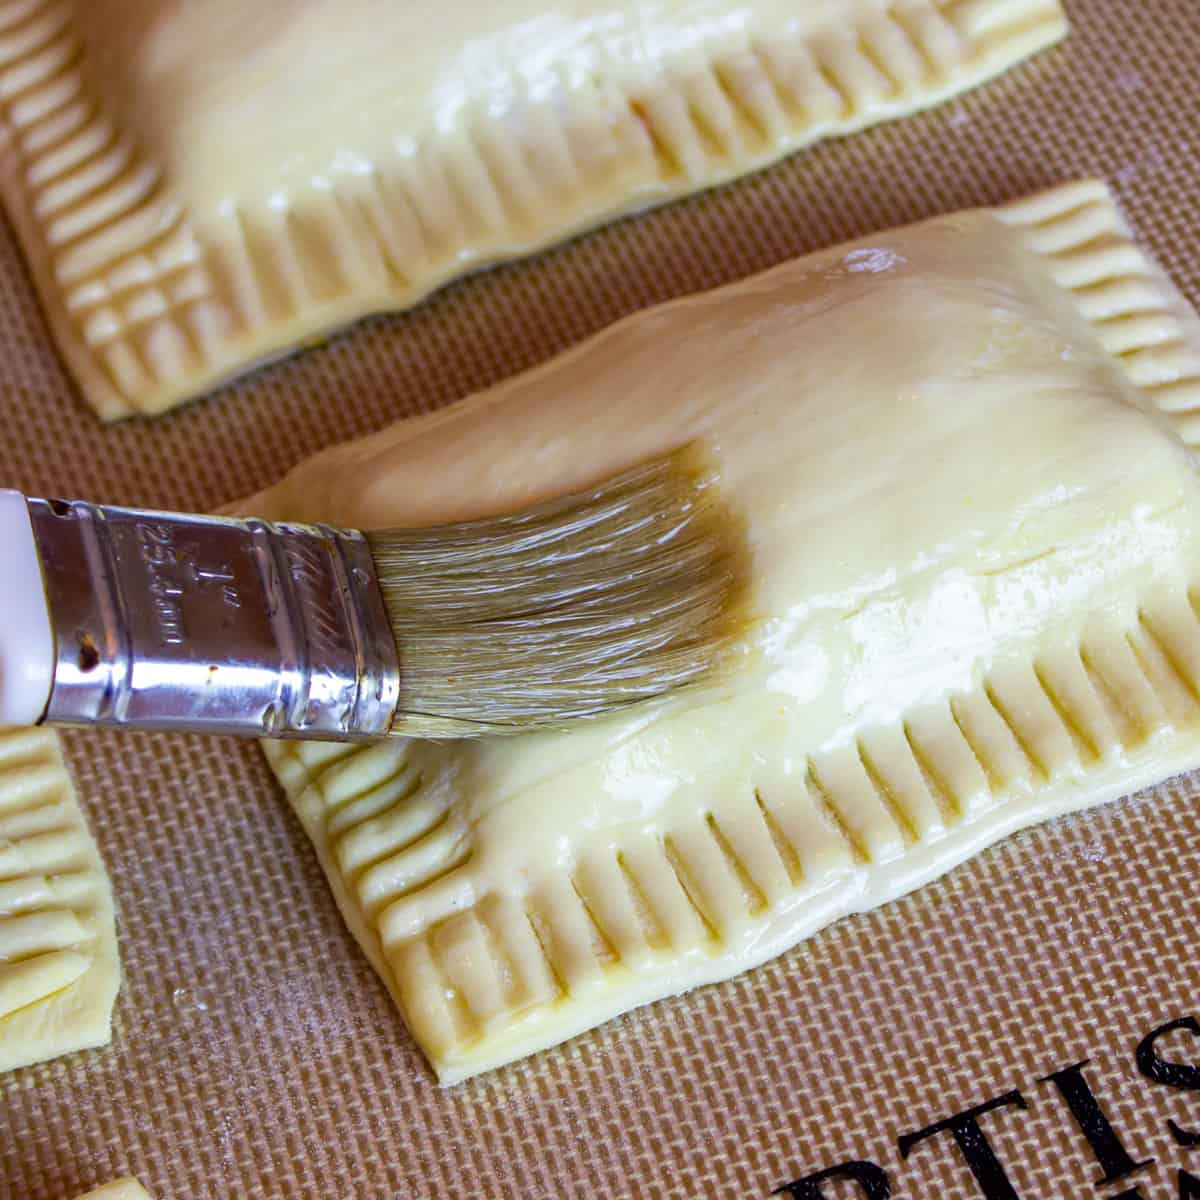 Using a pastry brush to add an egg wash to the turnovers.